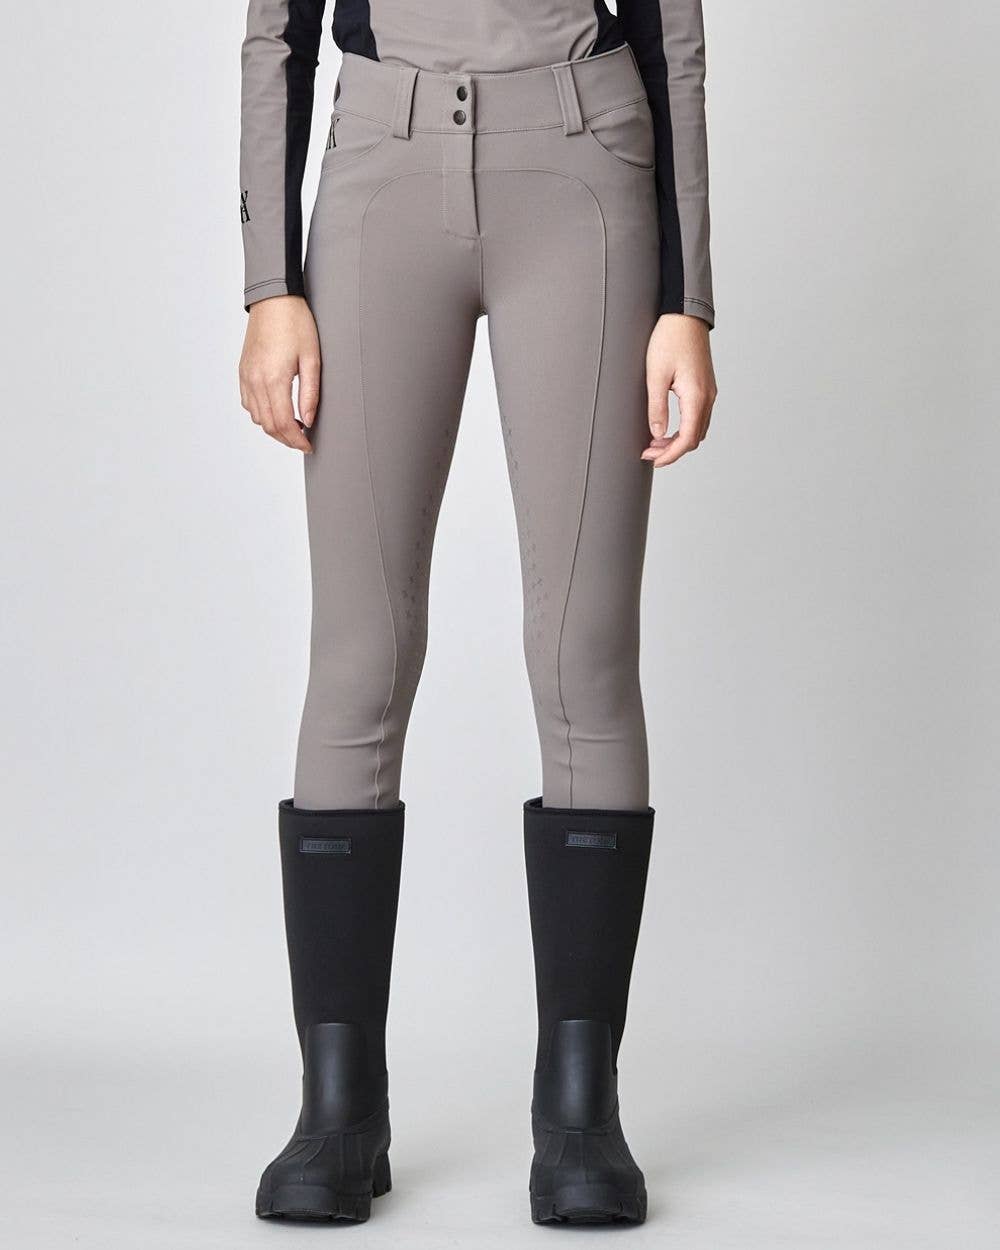 Classic Italian Jersey Full Seat Breeches in Taupe